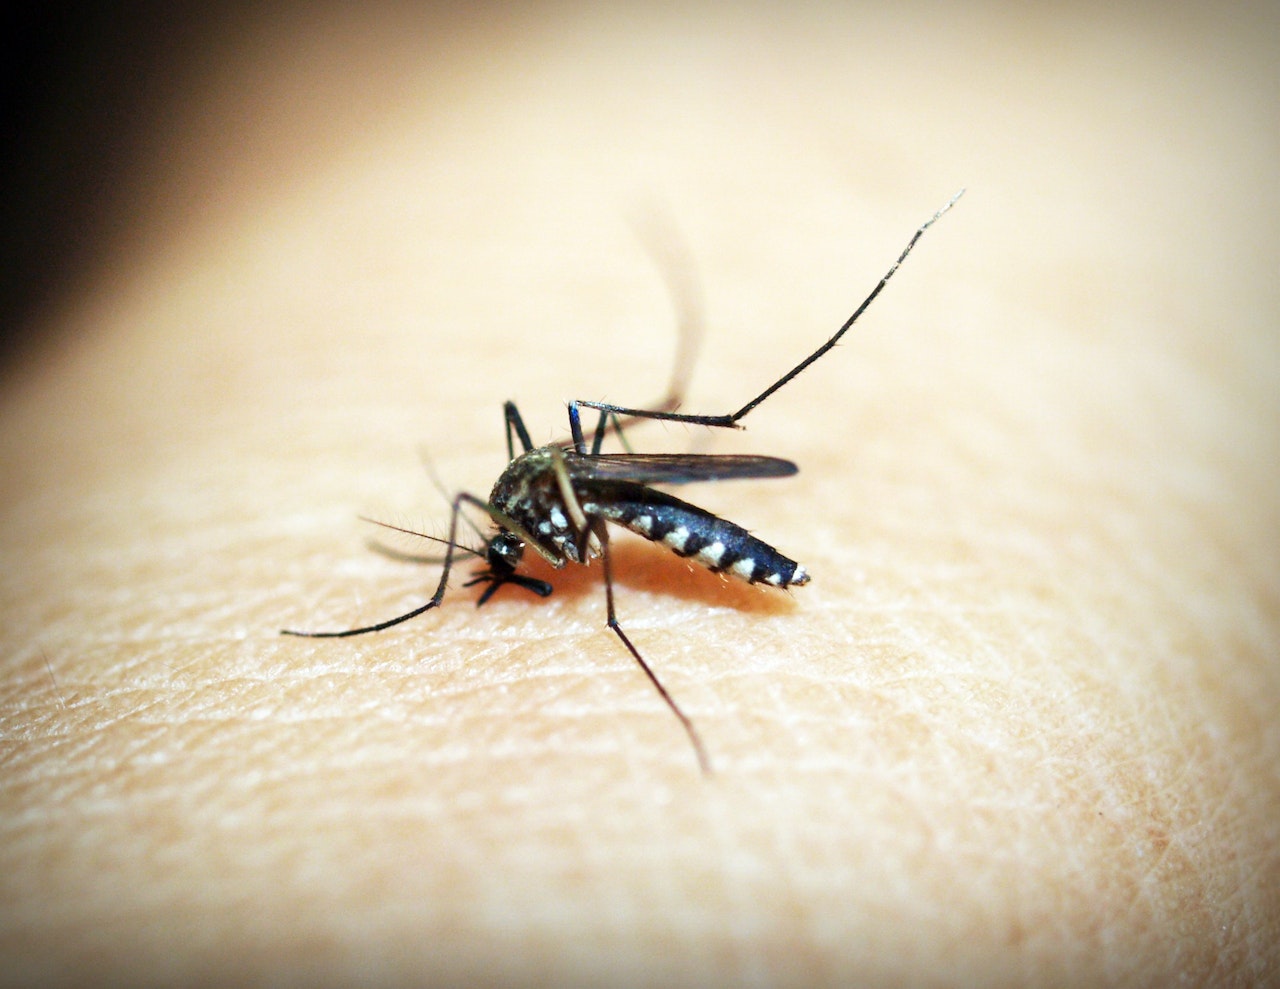 Mosquito sperm, the key to ending its menace

